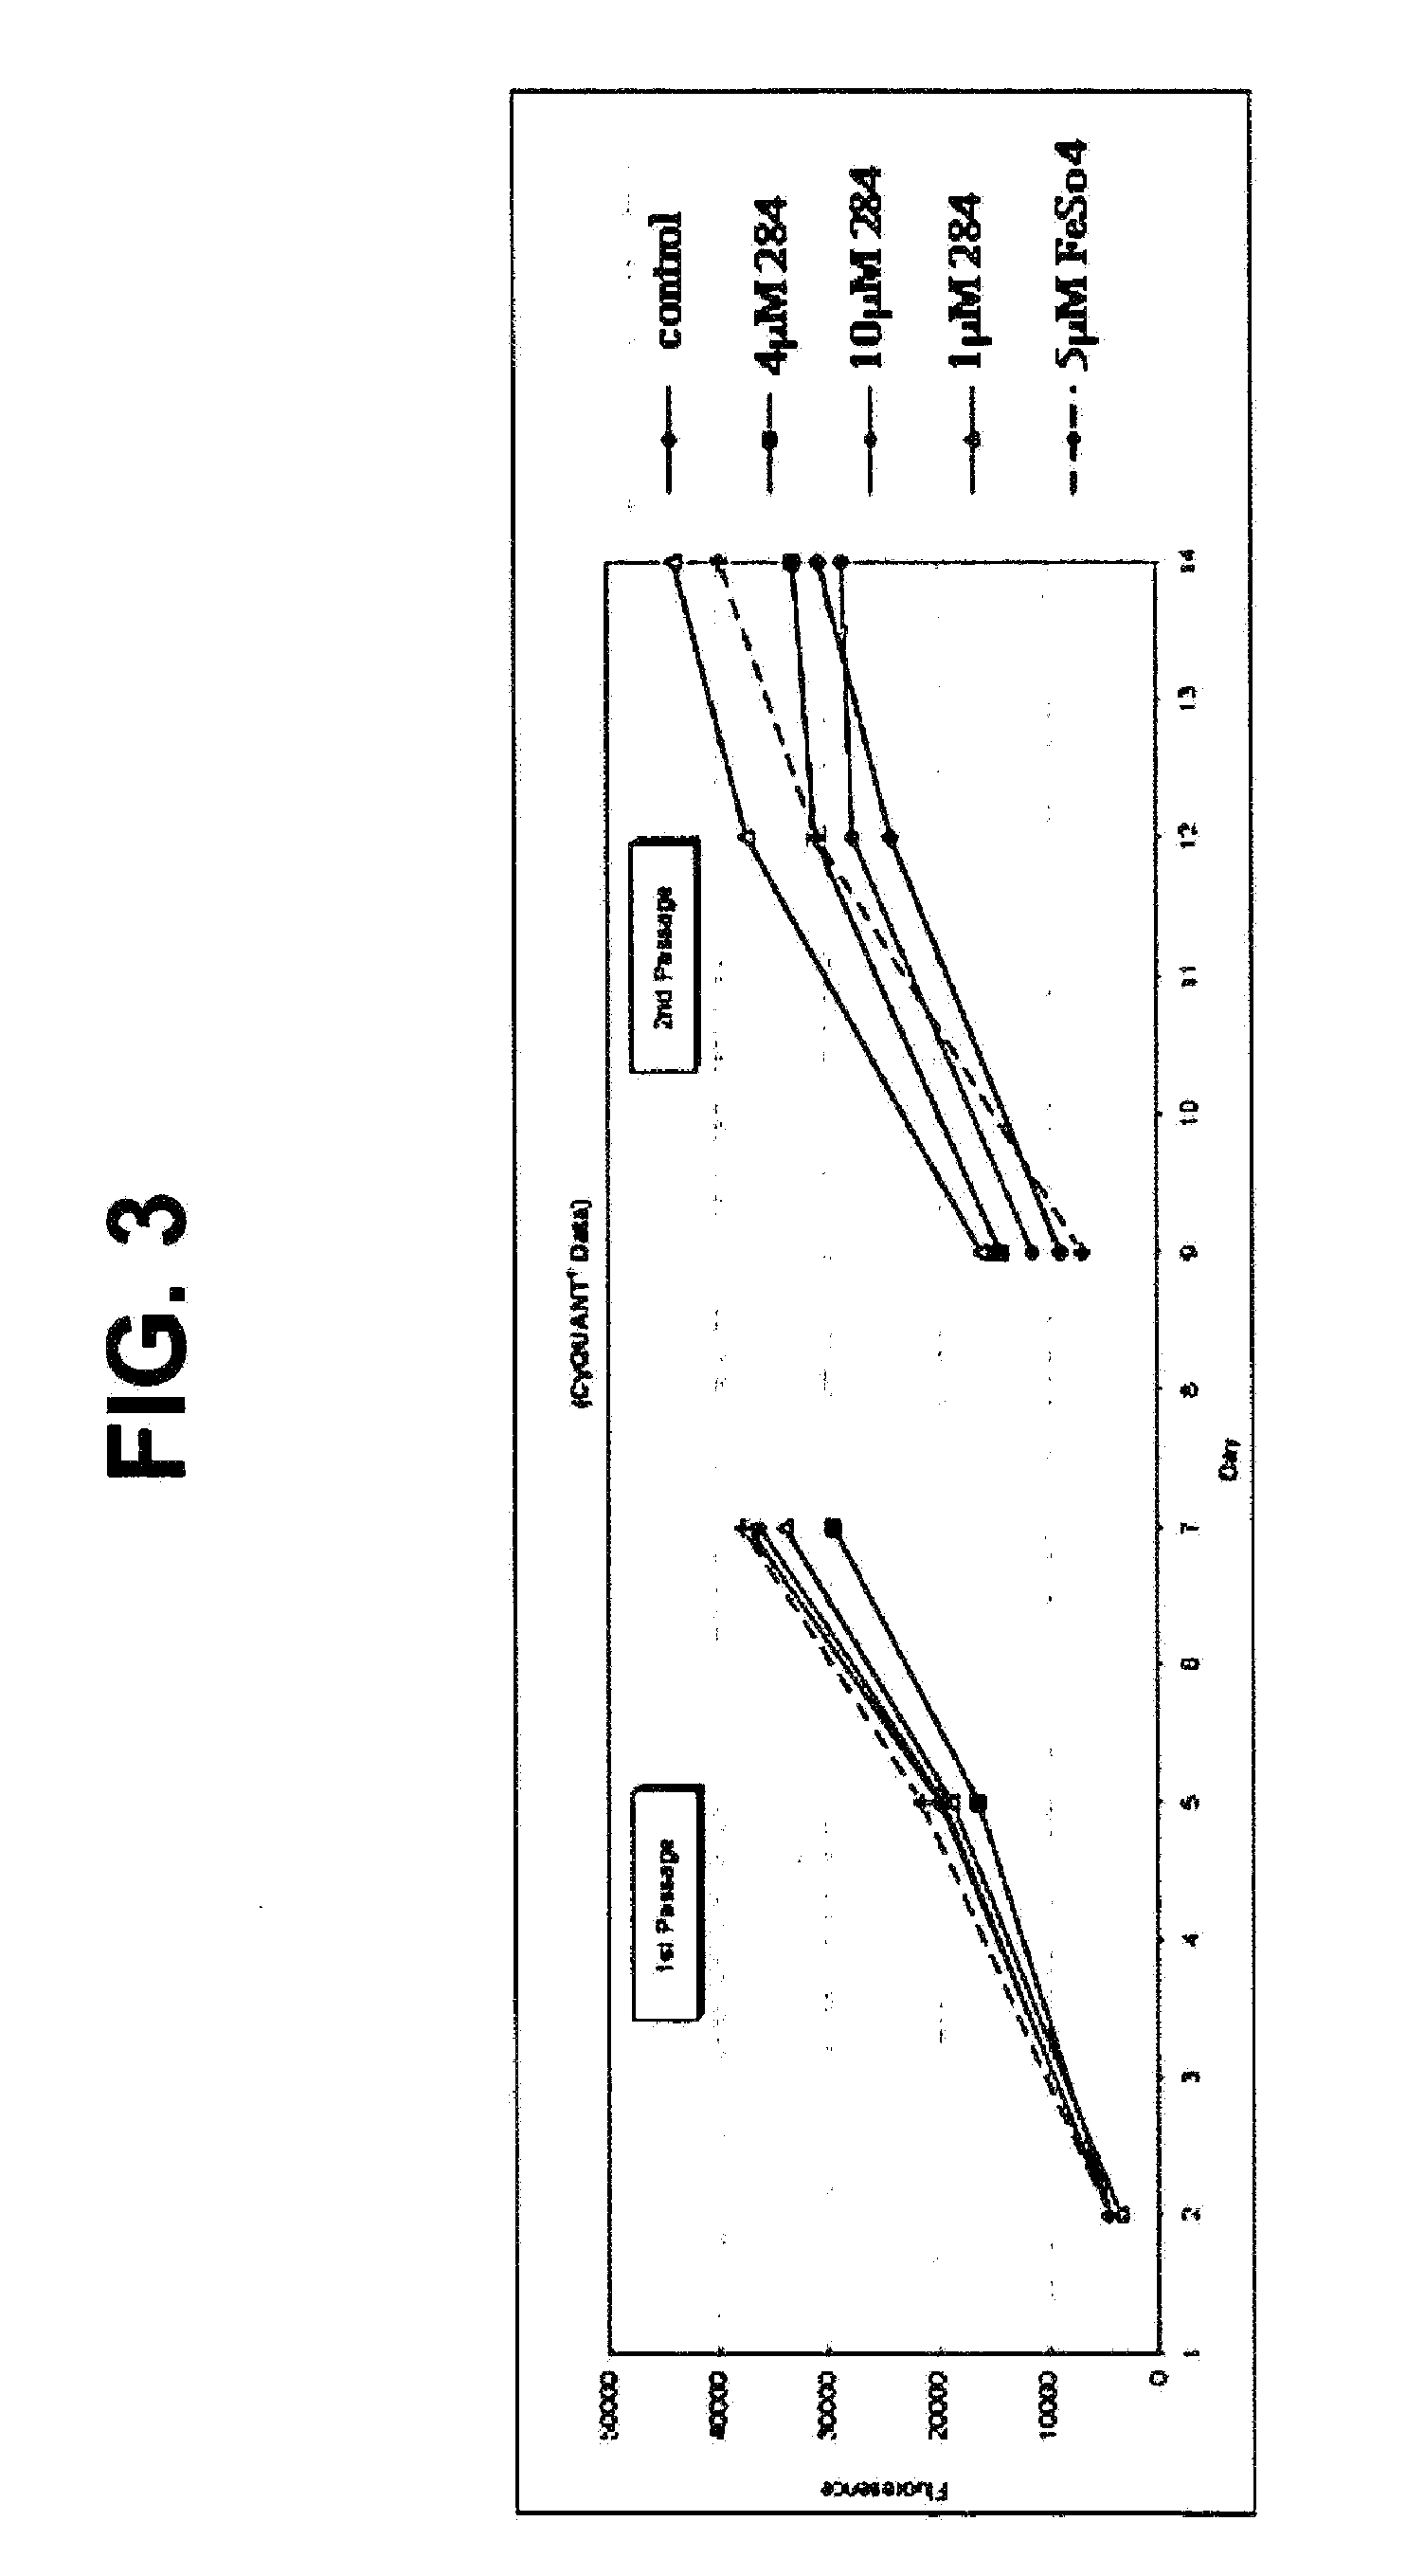 Method for enhancing epithelial cell proliferation and uses thereof